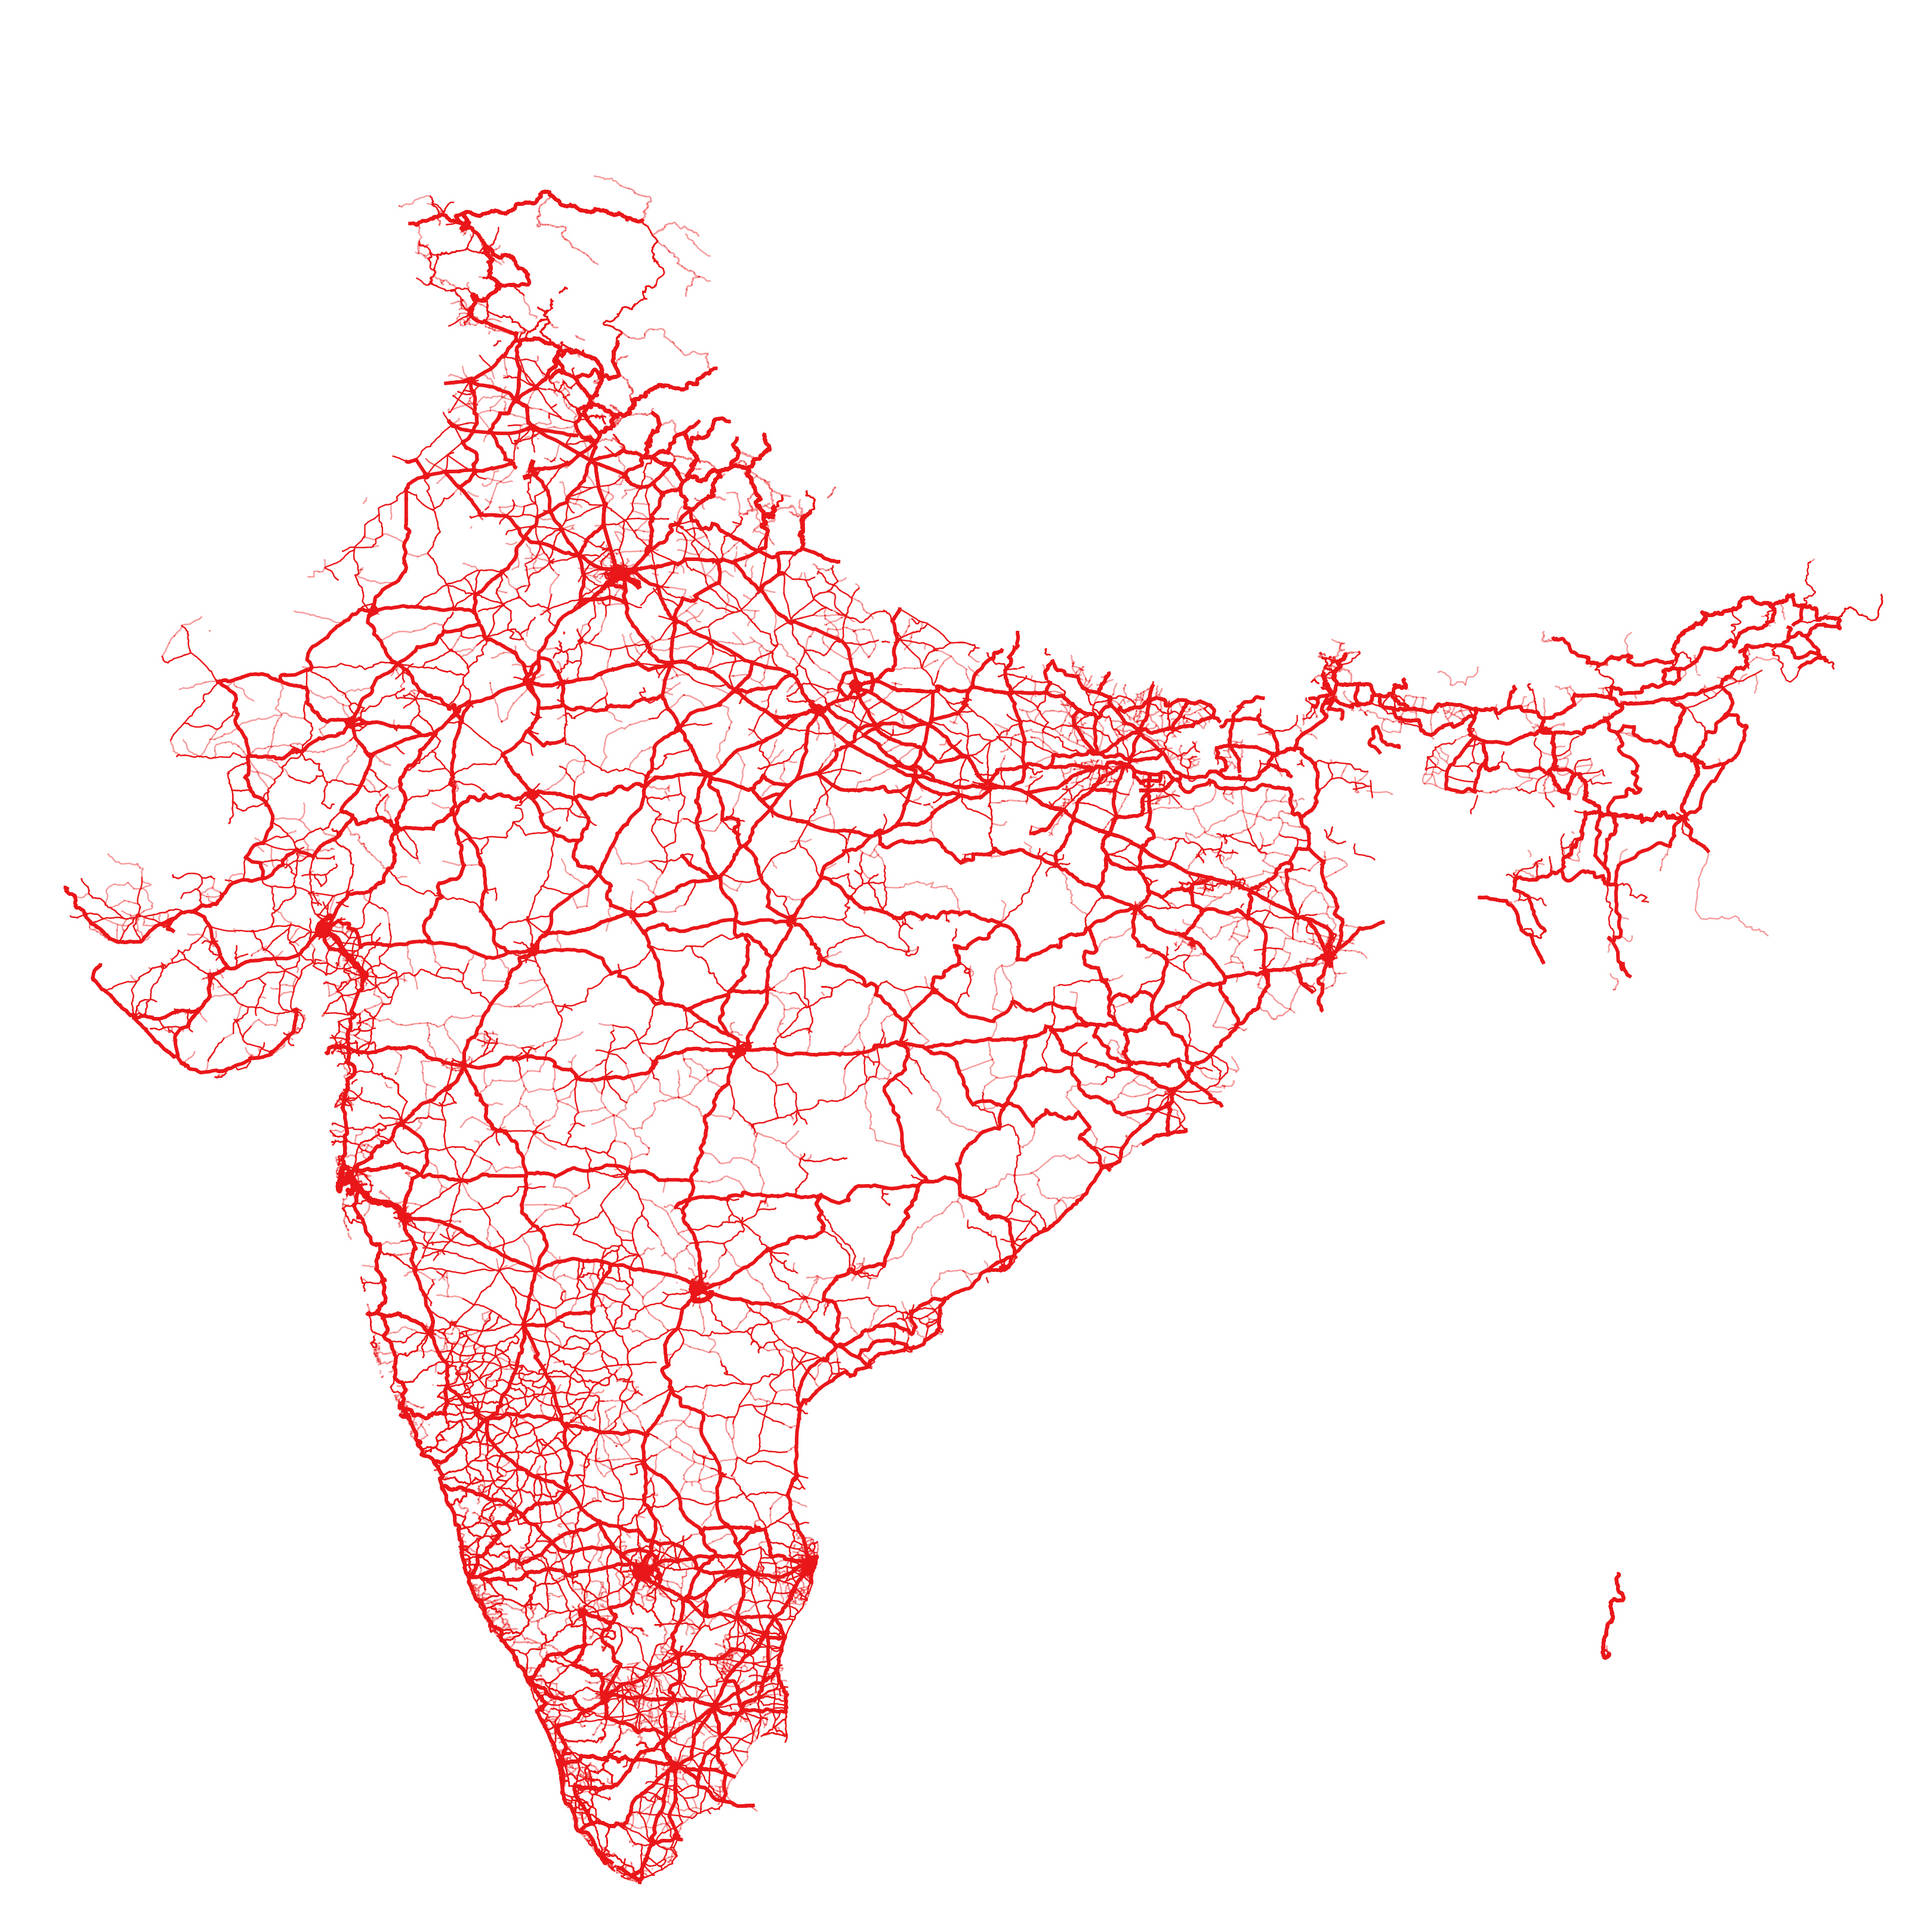 India Political Map in A3 Size